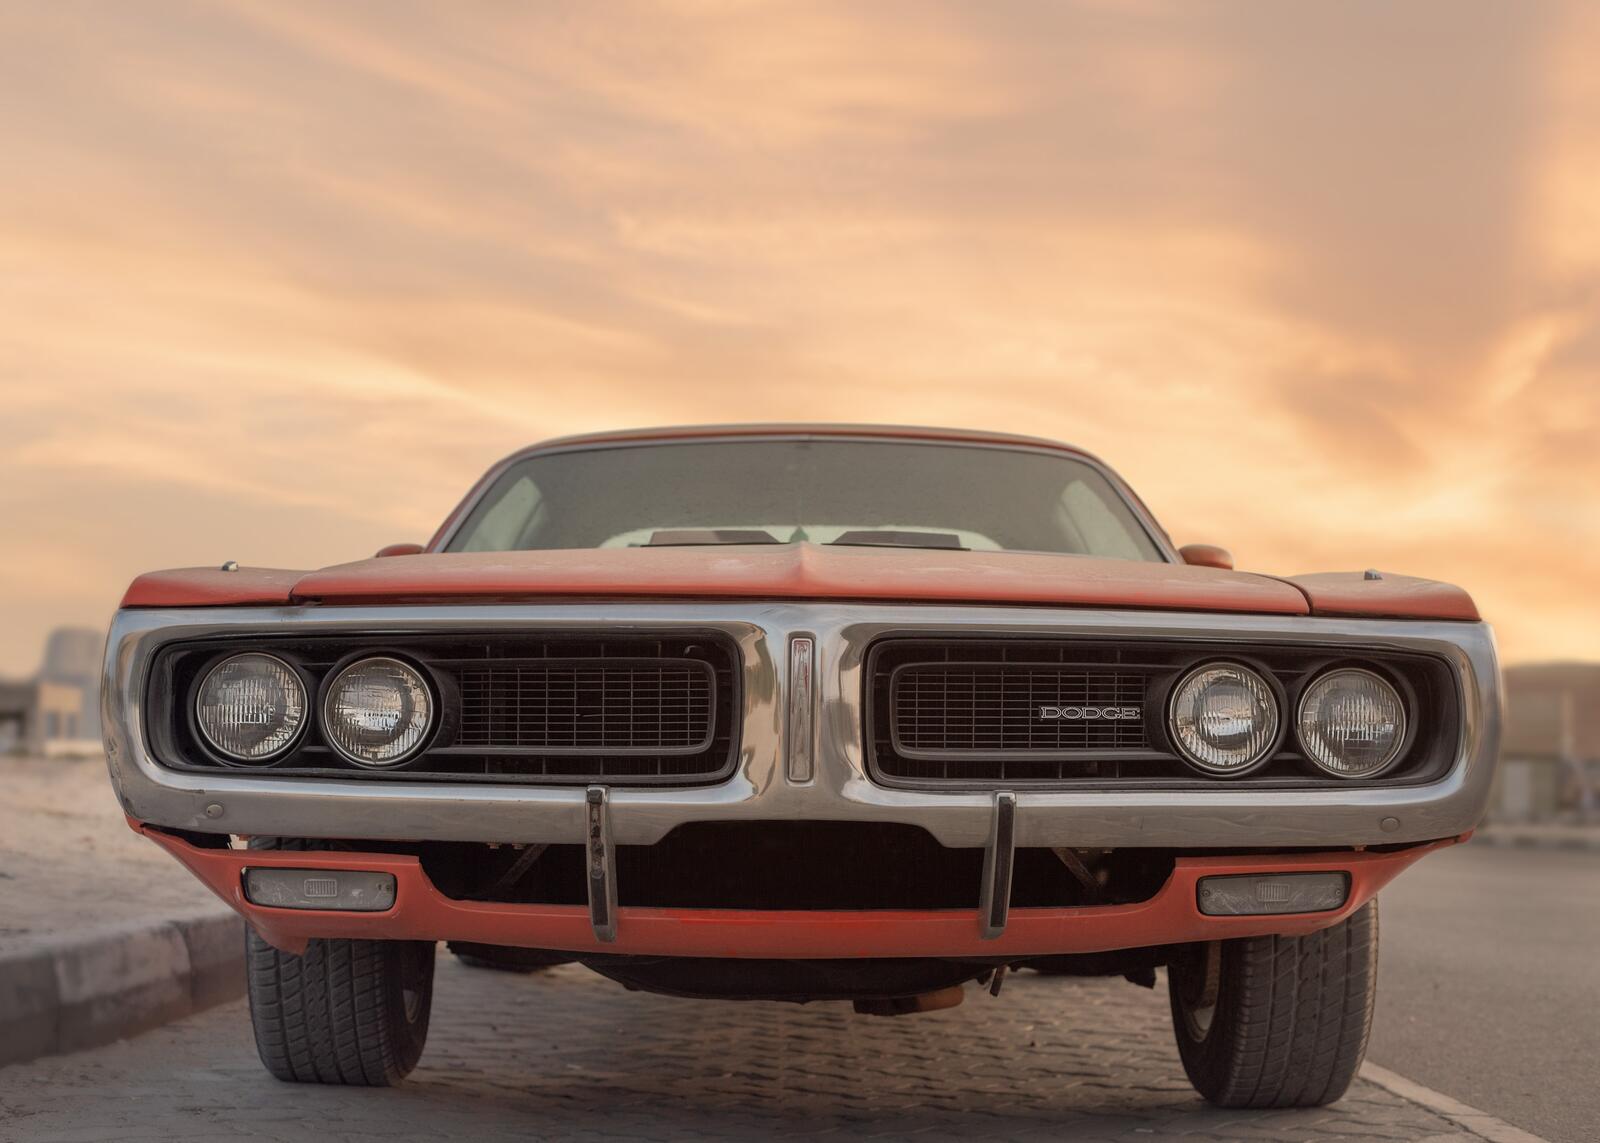 Wallpapers wallpaper dodge front view muscle cars on the desktop